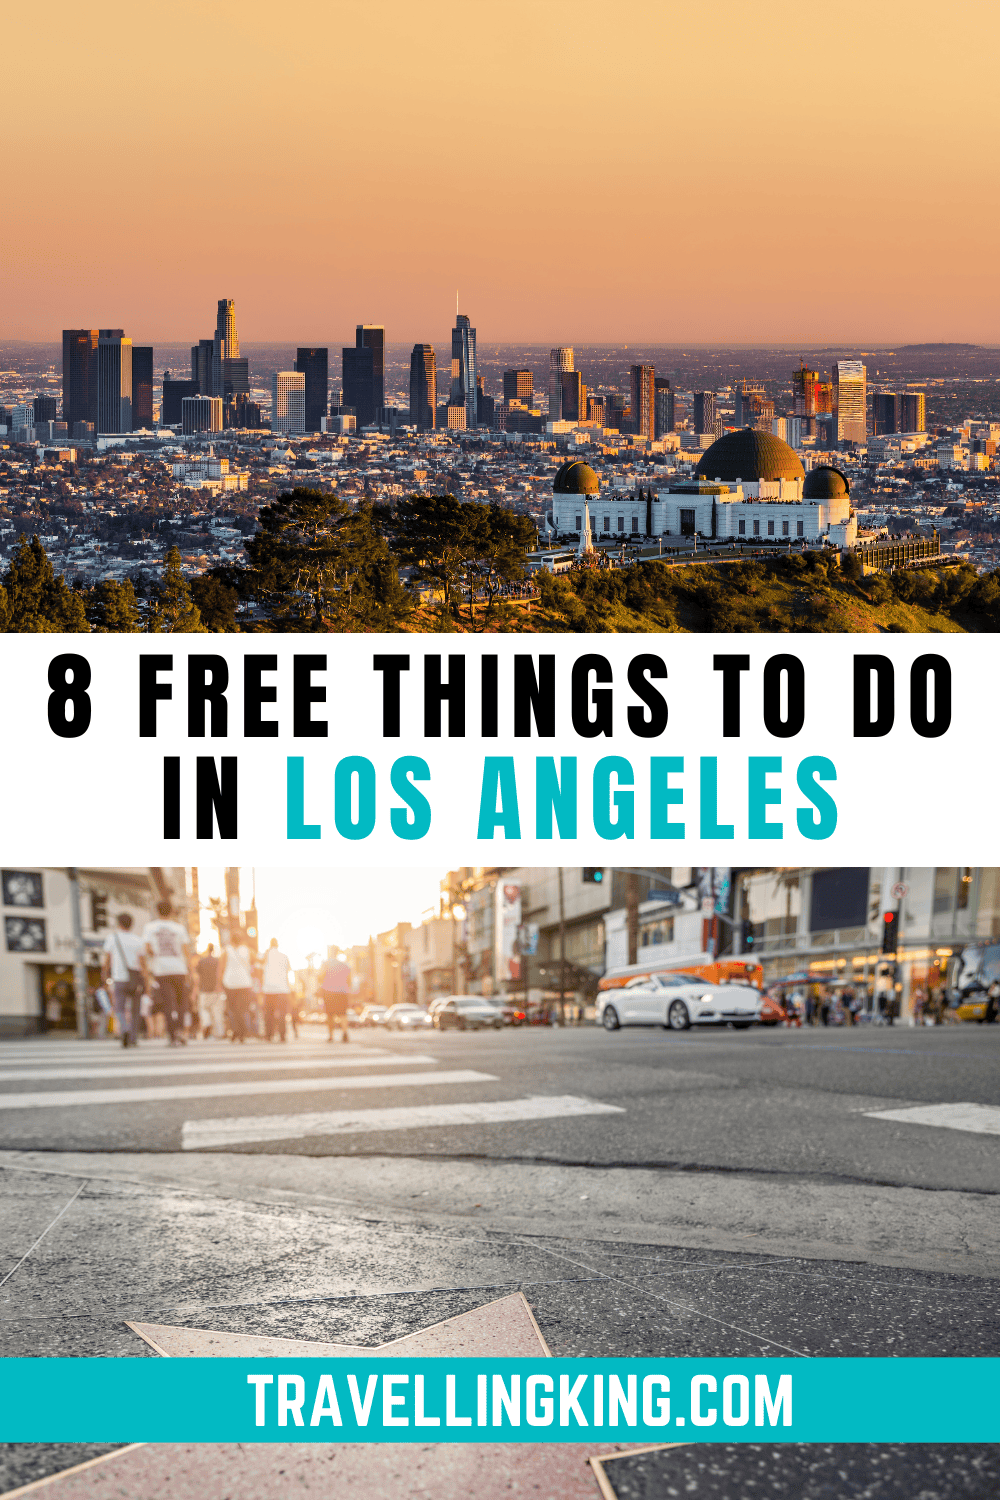 8 FREE Things to Do in Los Angeles